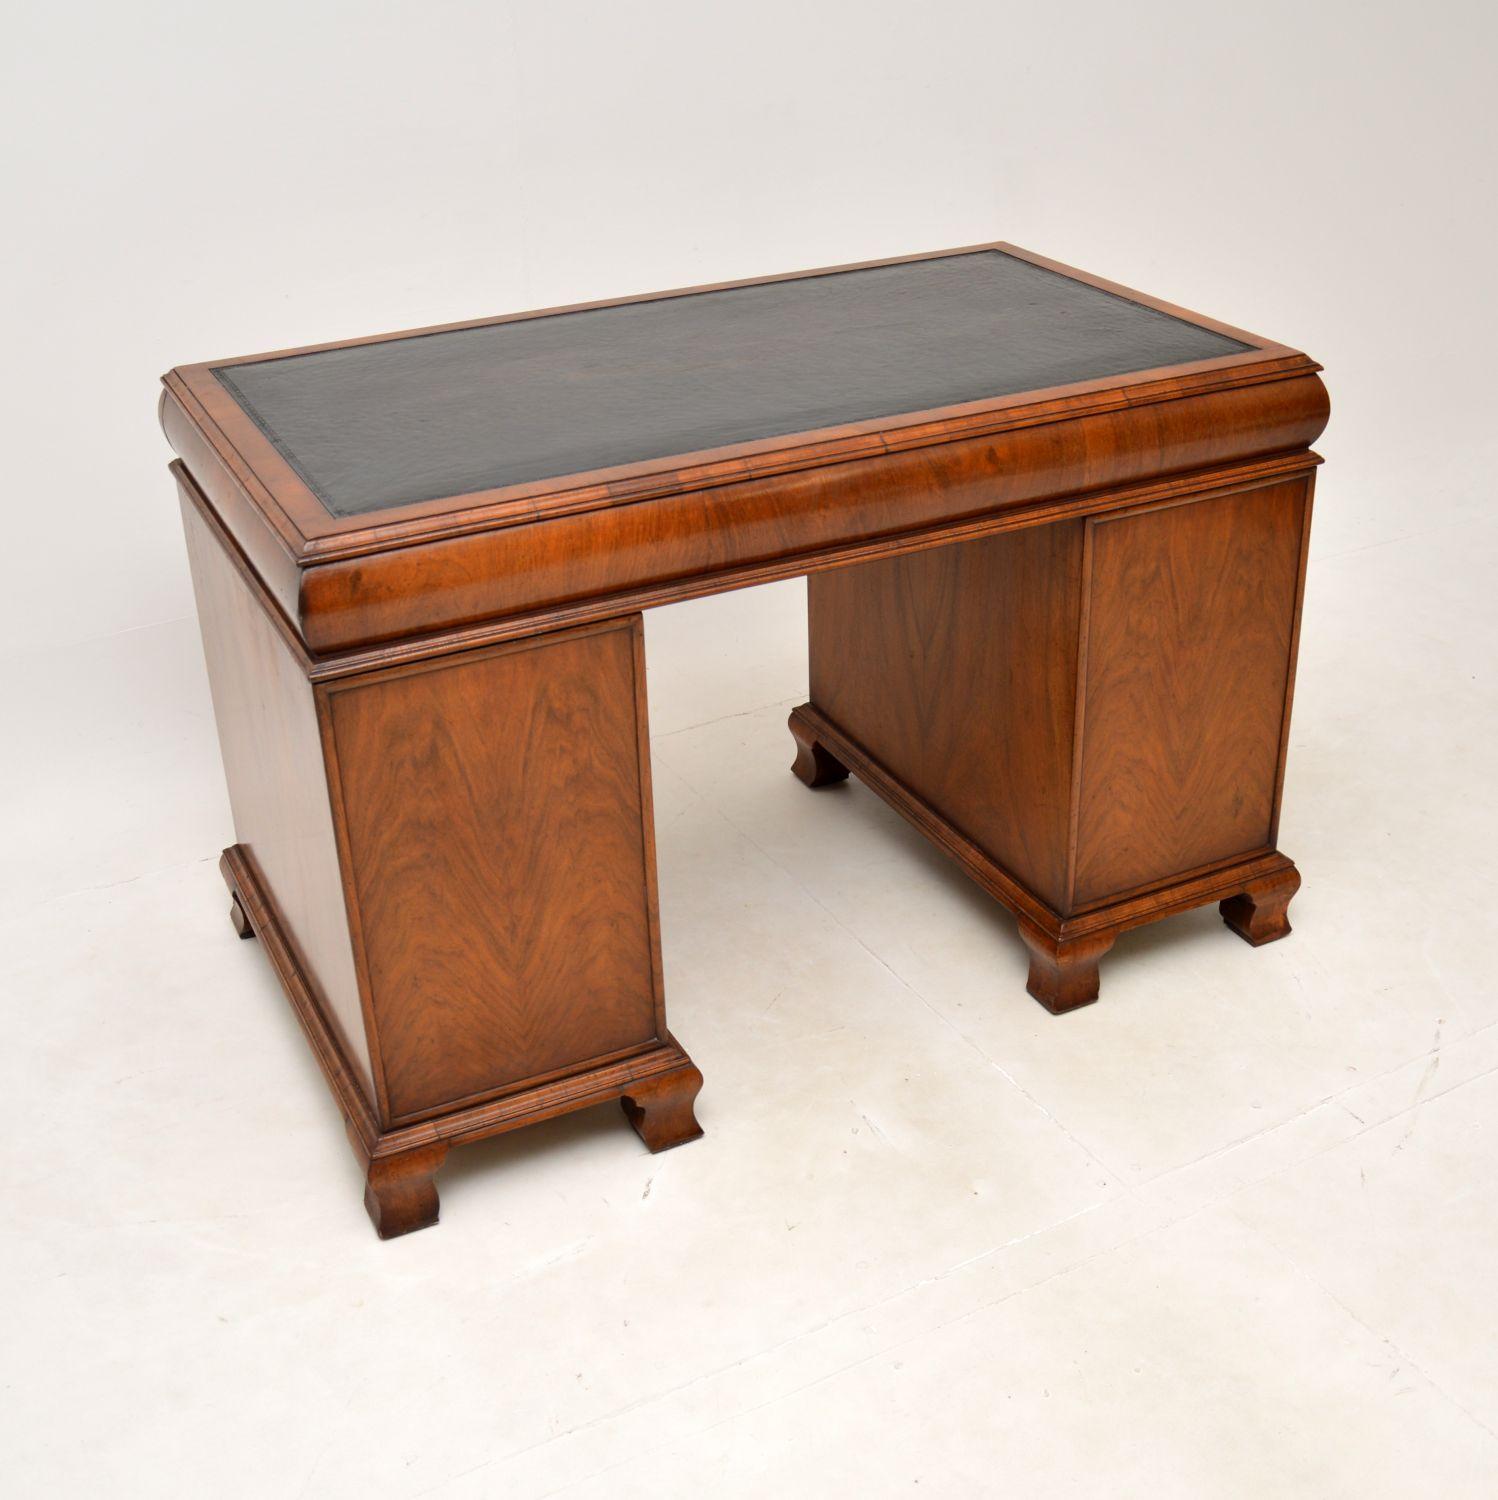 Antique Walnut Leather Top Pedestal Desk In Good Condition For Sale In London, GB